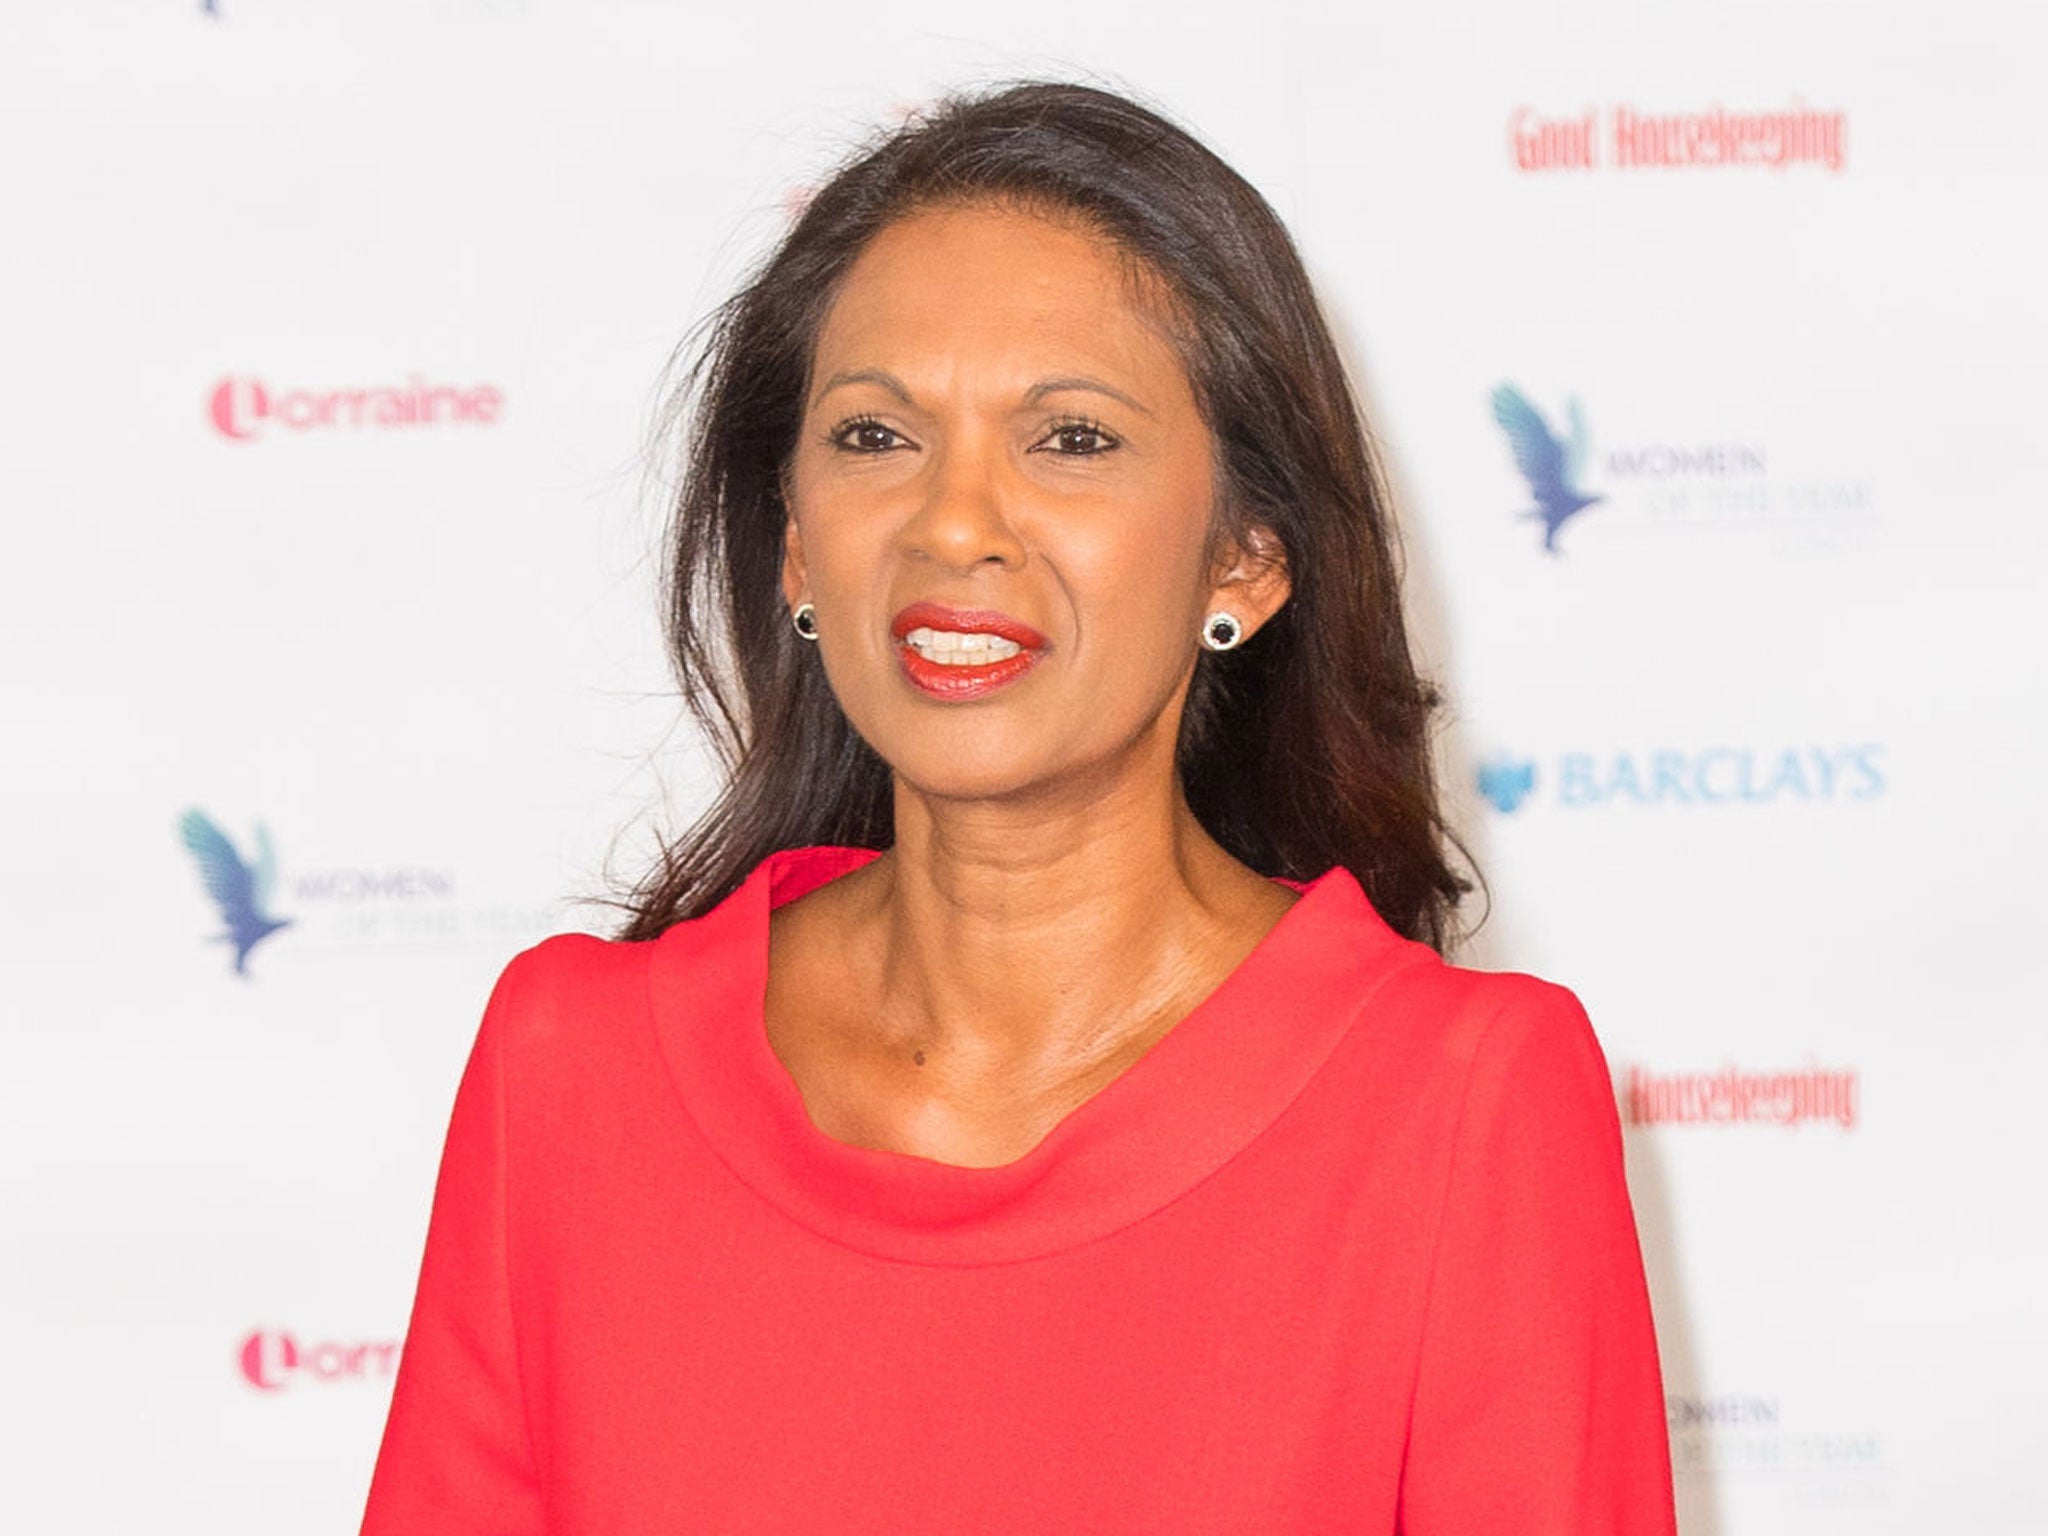 Brexit: Gina Miller files for legal challenge to stop Boris Johnson's 'cynical and cowardly' plan to prorogue parliament